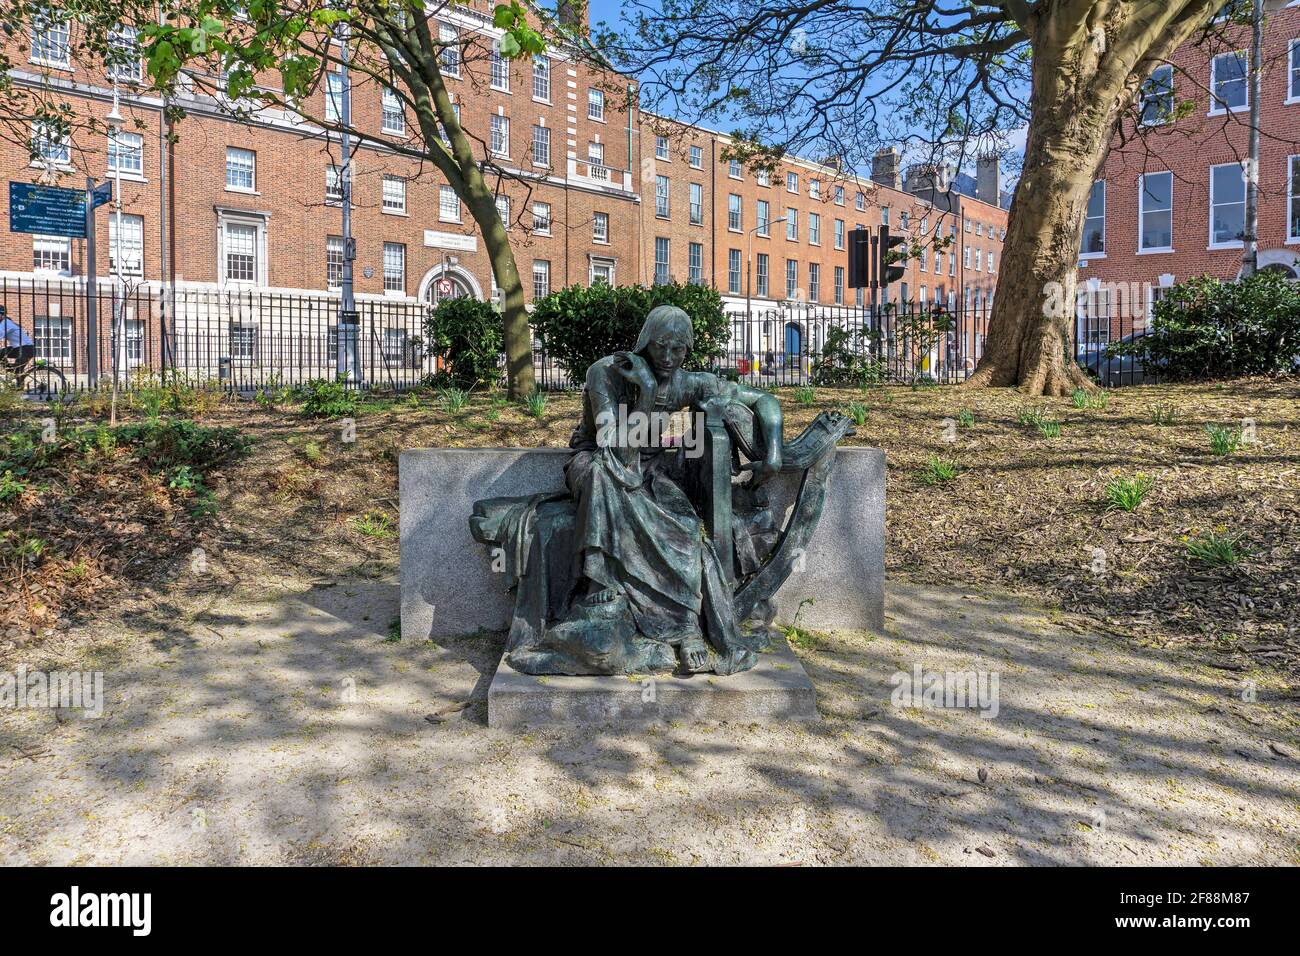 Eire, A statue representing Eire by Jerome O’Connor in Merrion Square Park, Dublin. Presented by the Downes family of Butterkrust Bakery. Stock Photo